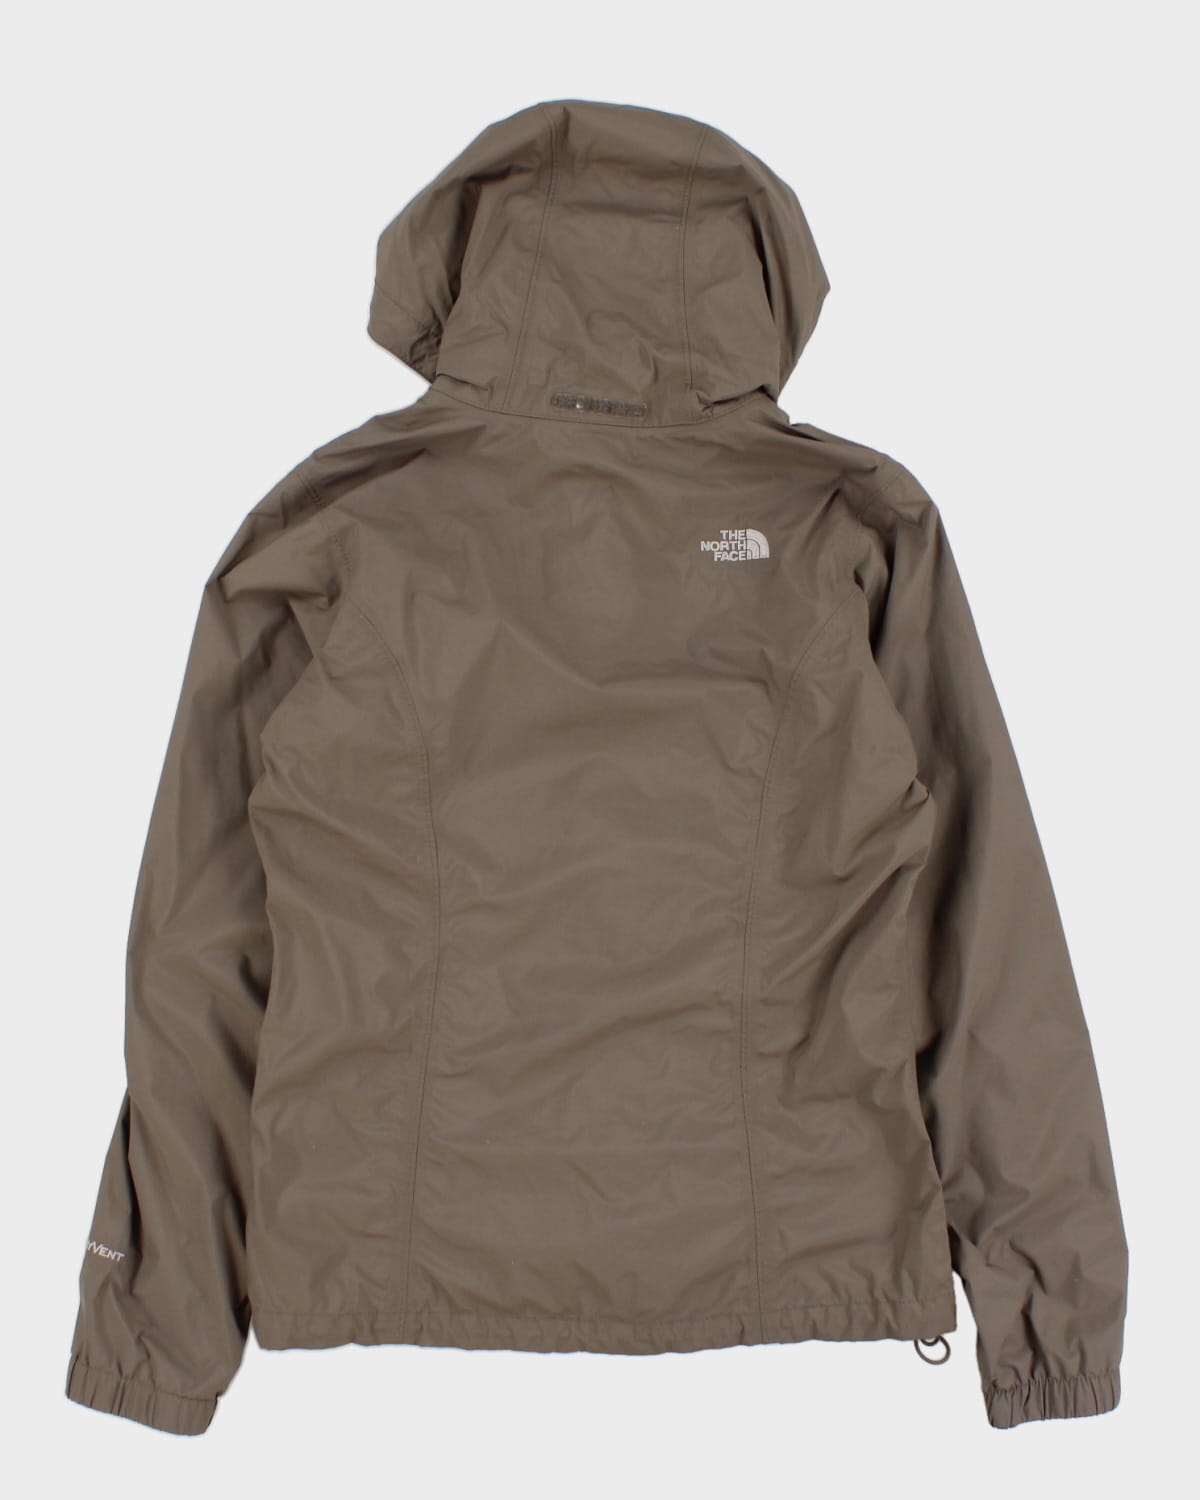 The North Face Brown Hooded Jacket - S